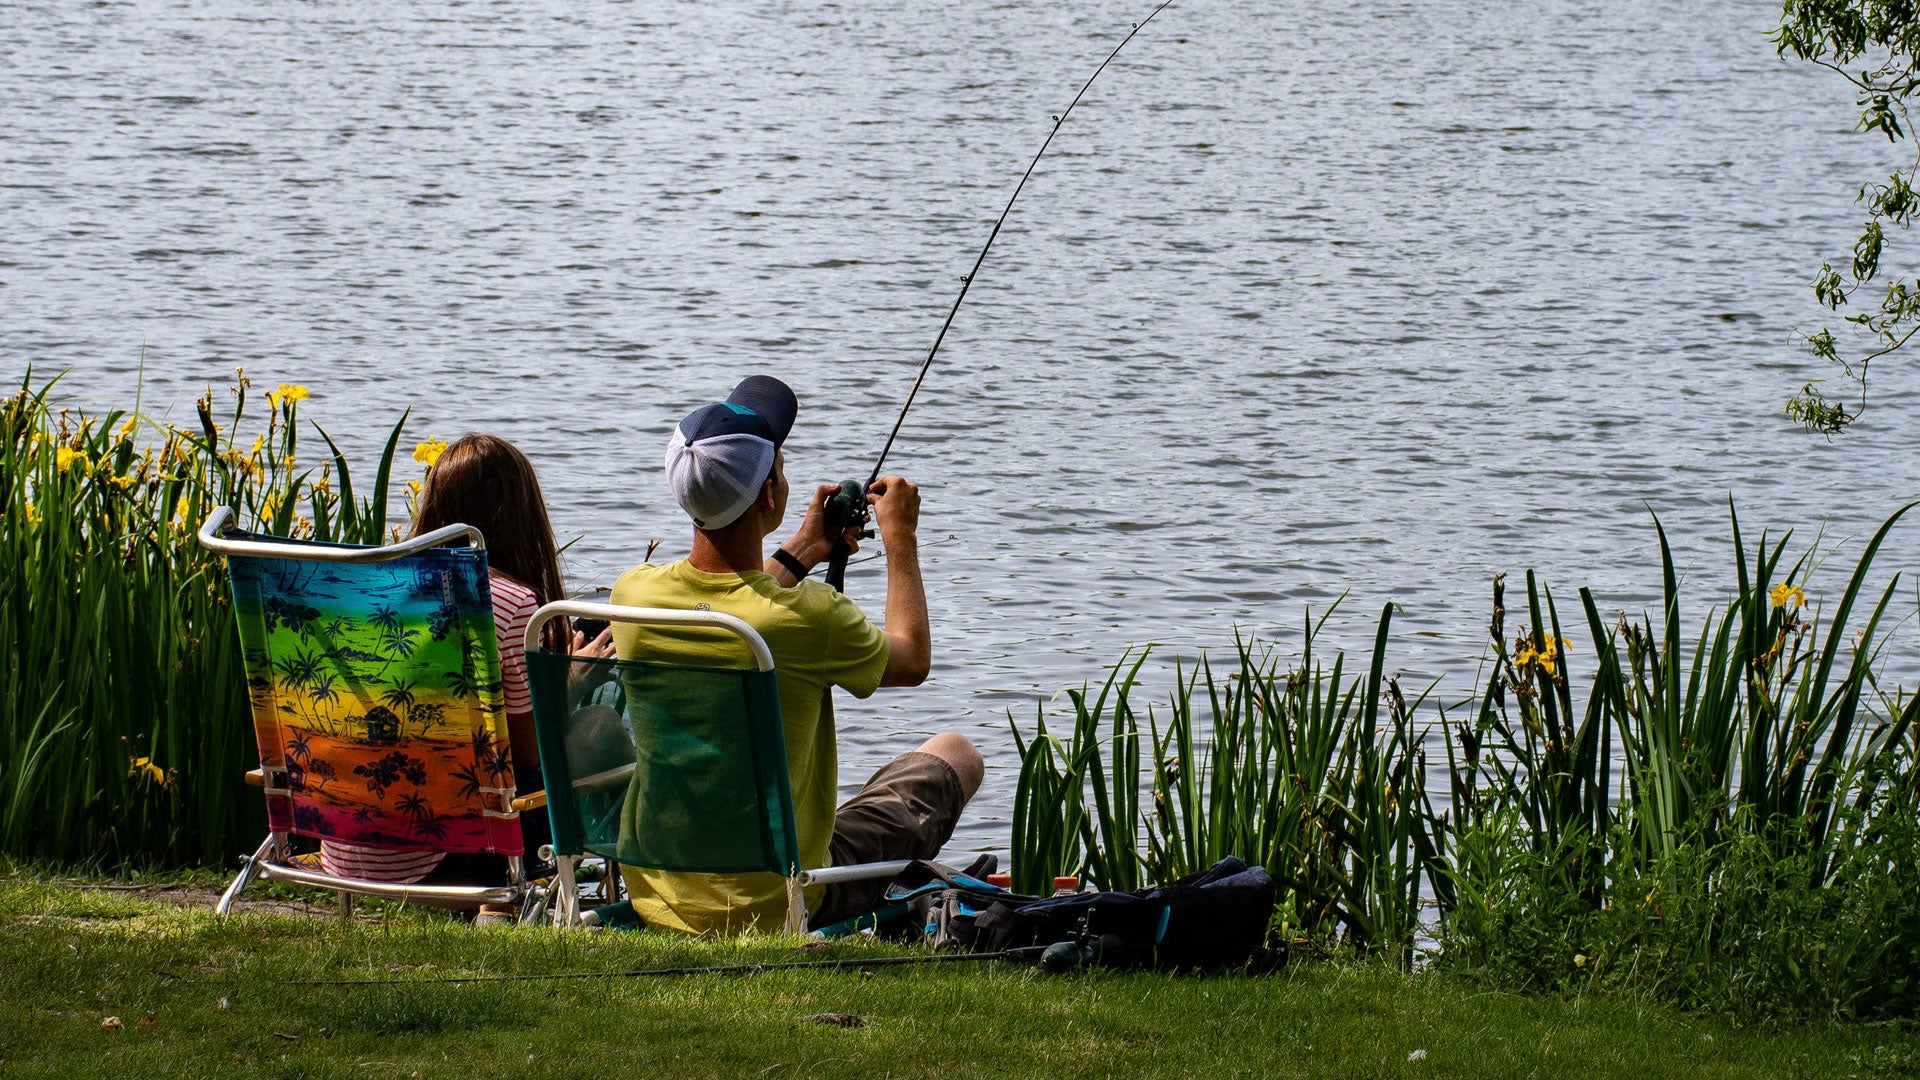 Fishing is great for mental health